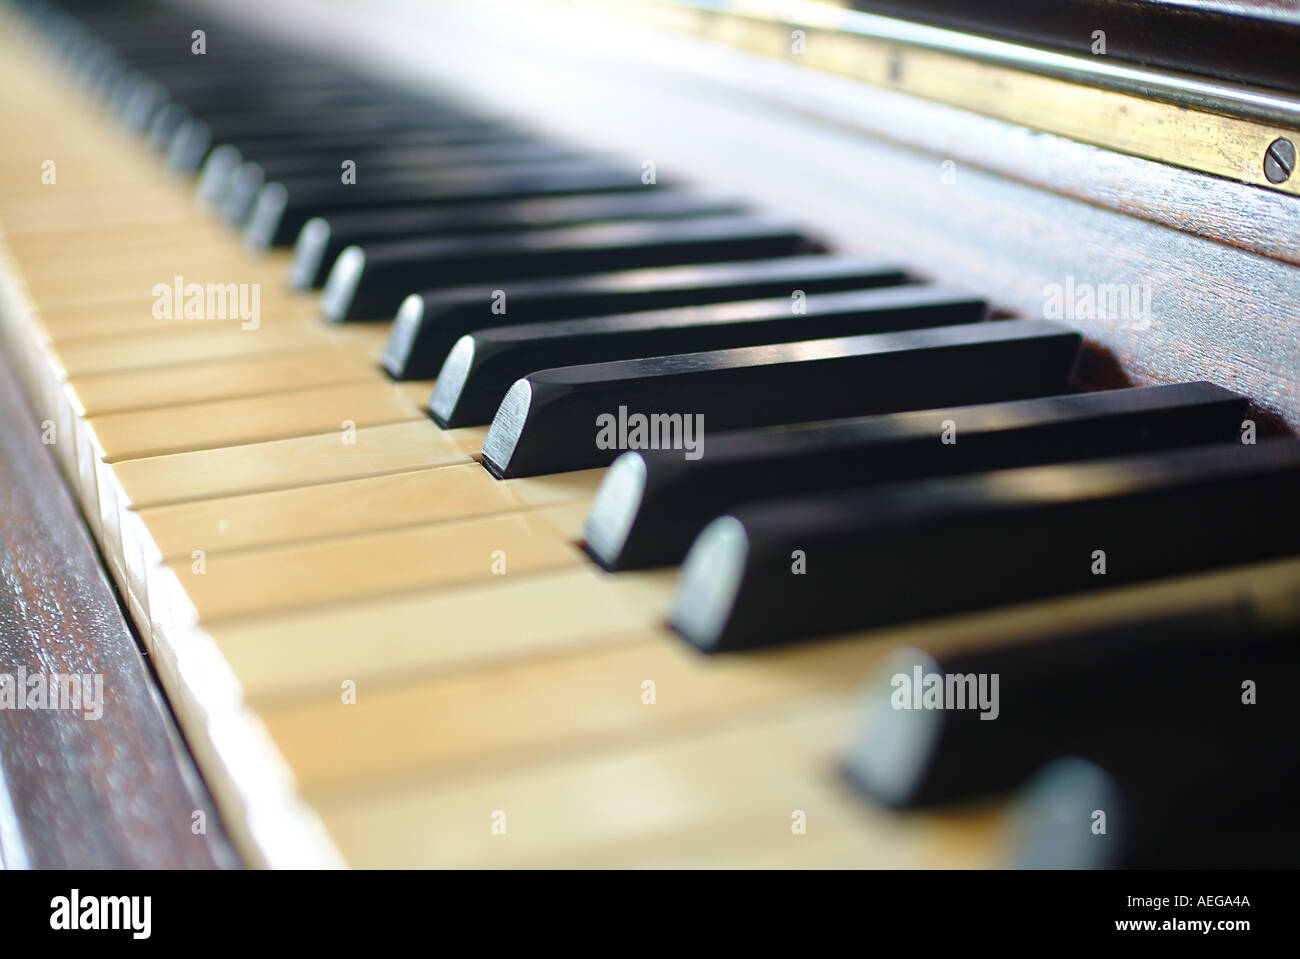 Sweet Home music piano keyboard black white wood wooden scale notes sounds chords big heavy abstract concept miscellaneous music Stock Photo